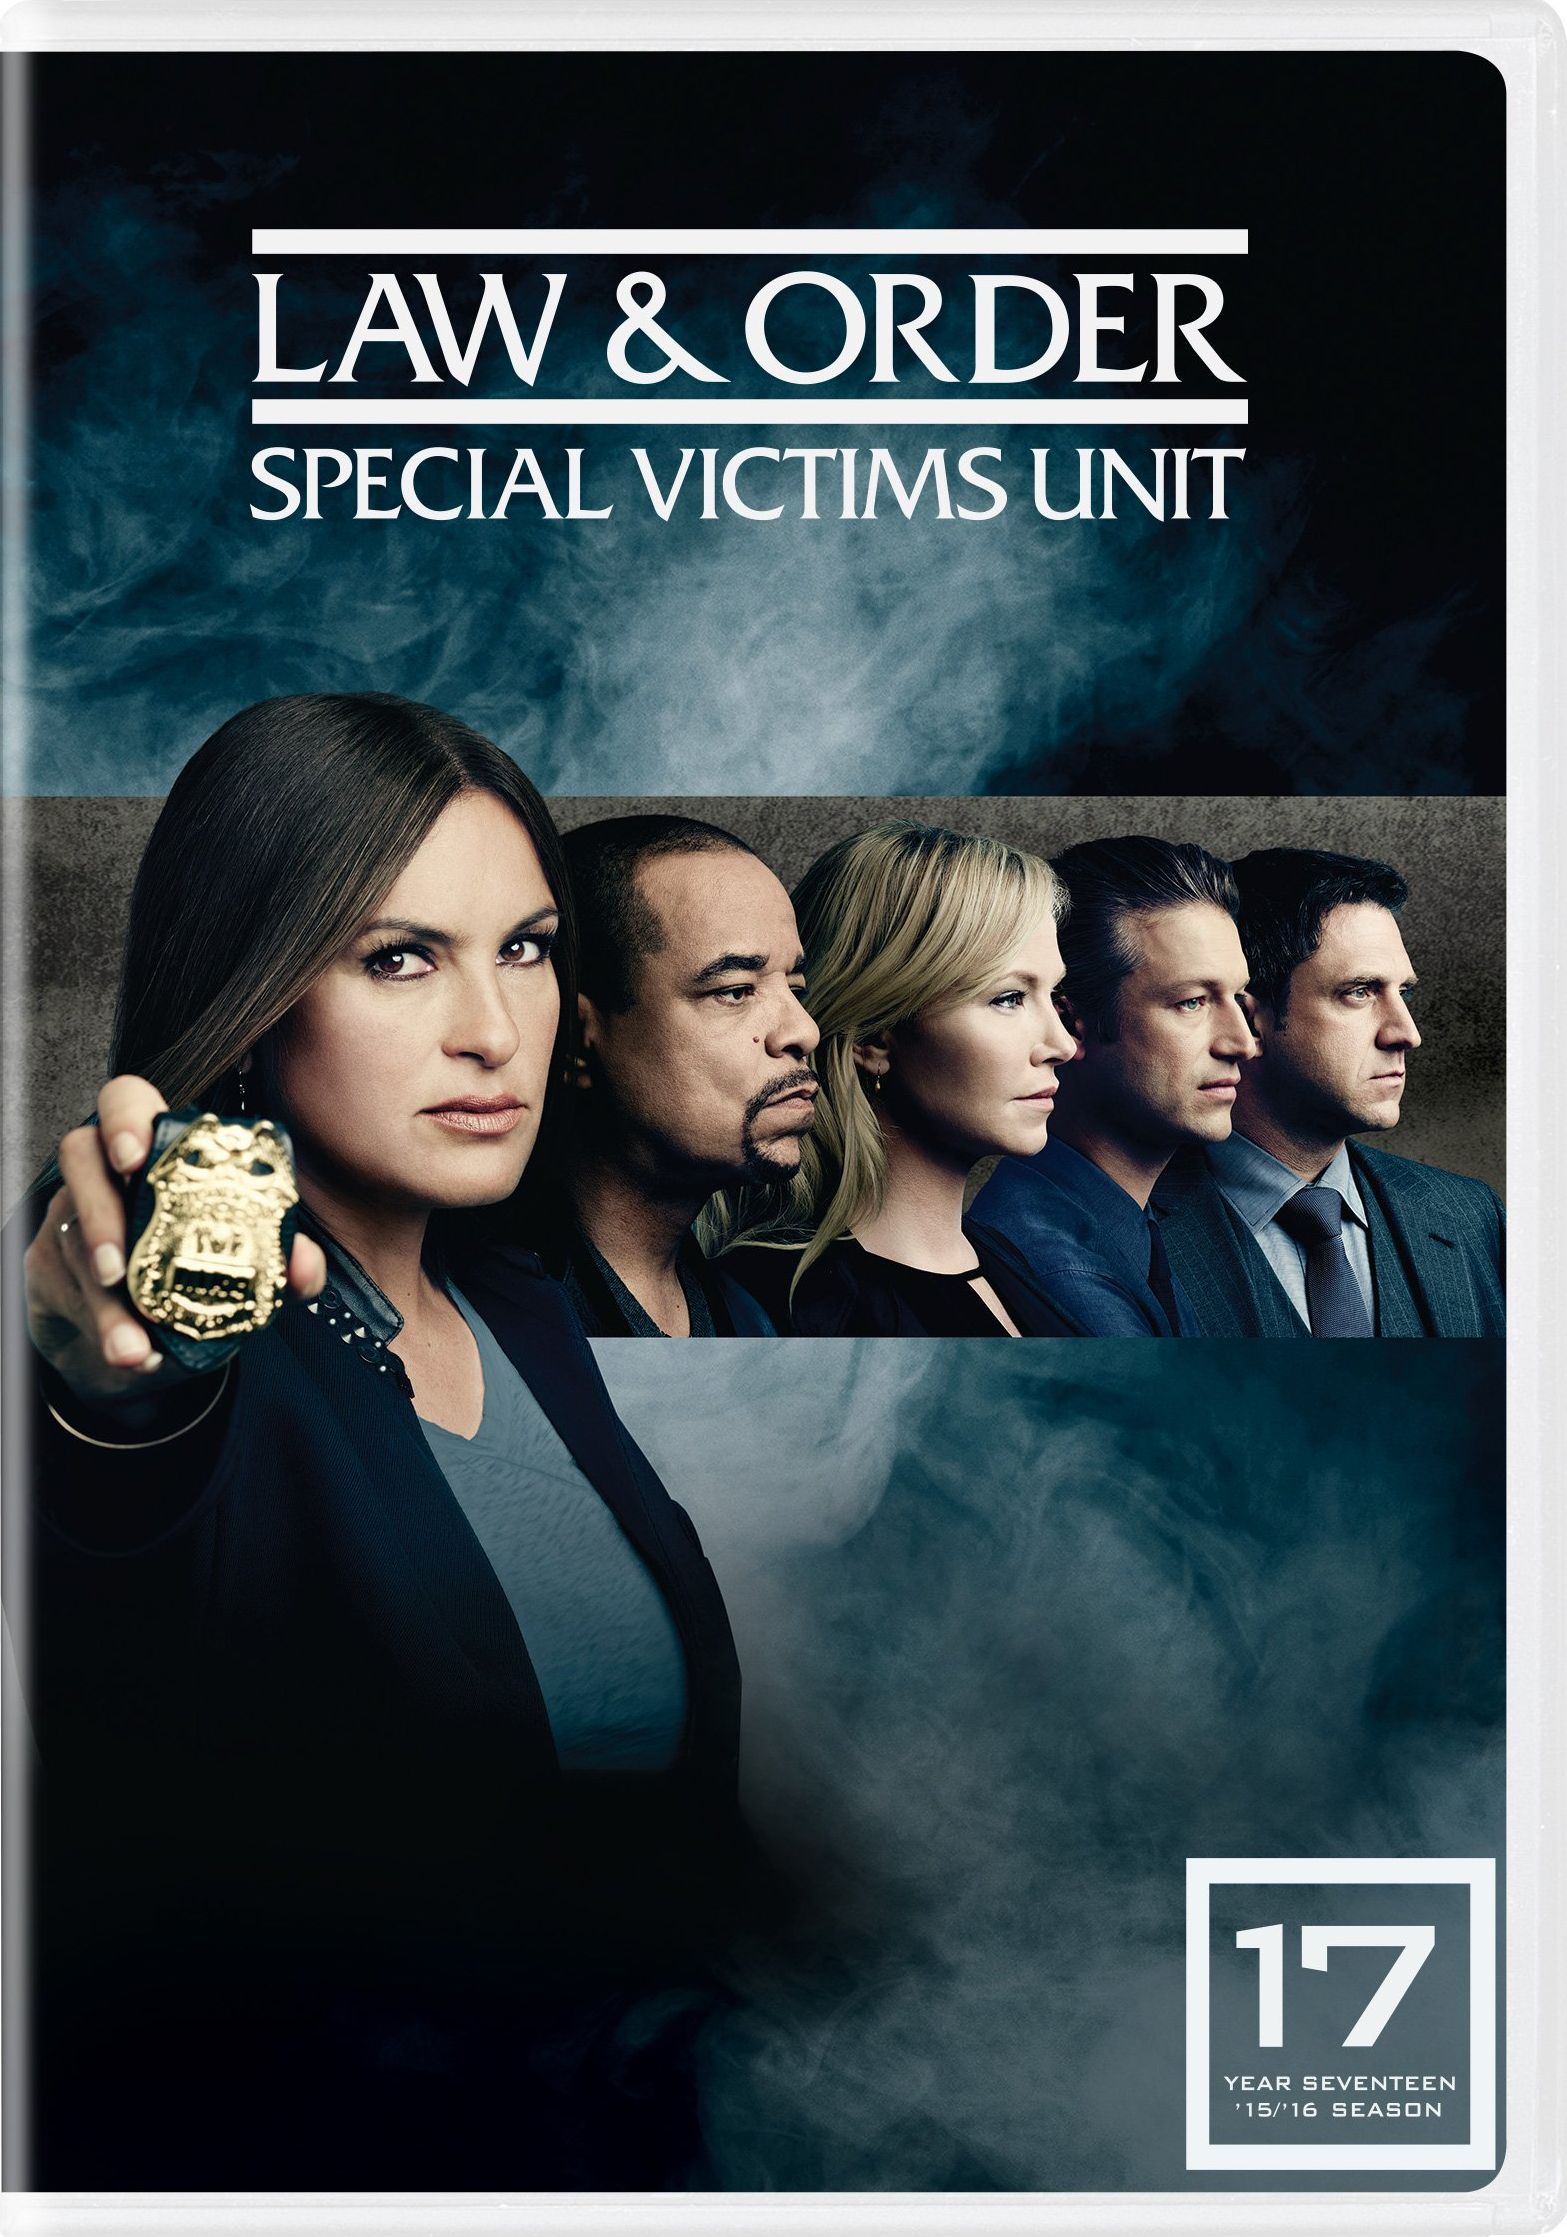 Law & Order: Special Victims Unit - The Seventeenth Year DVD.